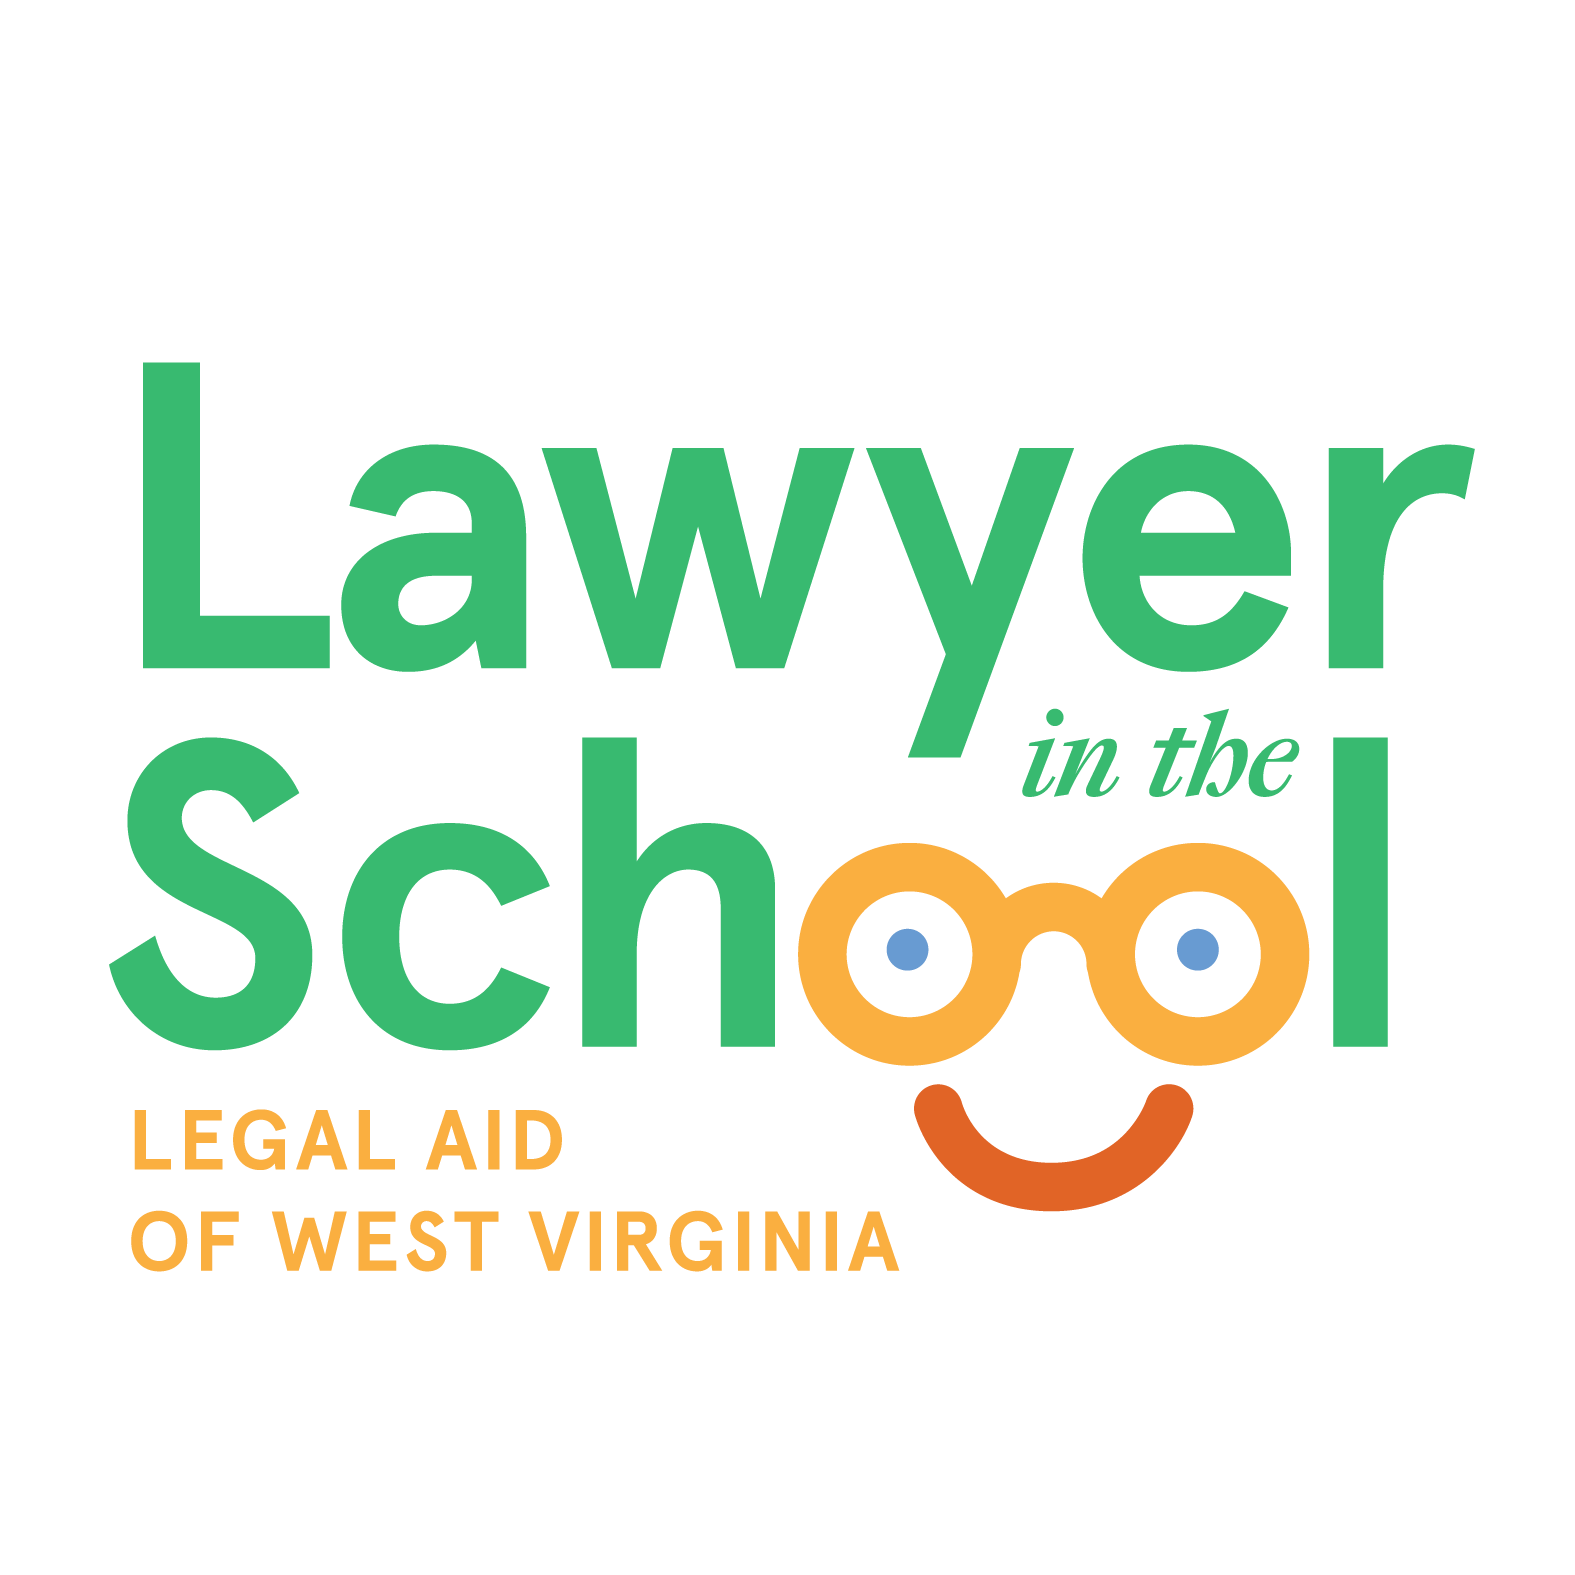 Logo for Legal Aid of West Virginia - Lawyer in the School